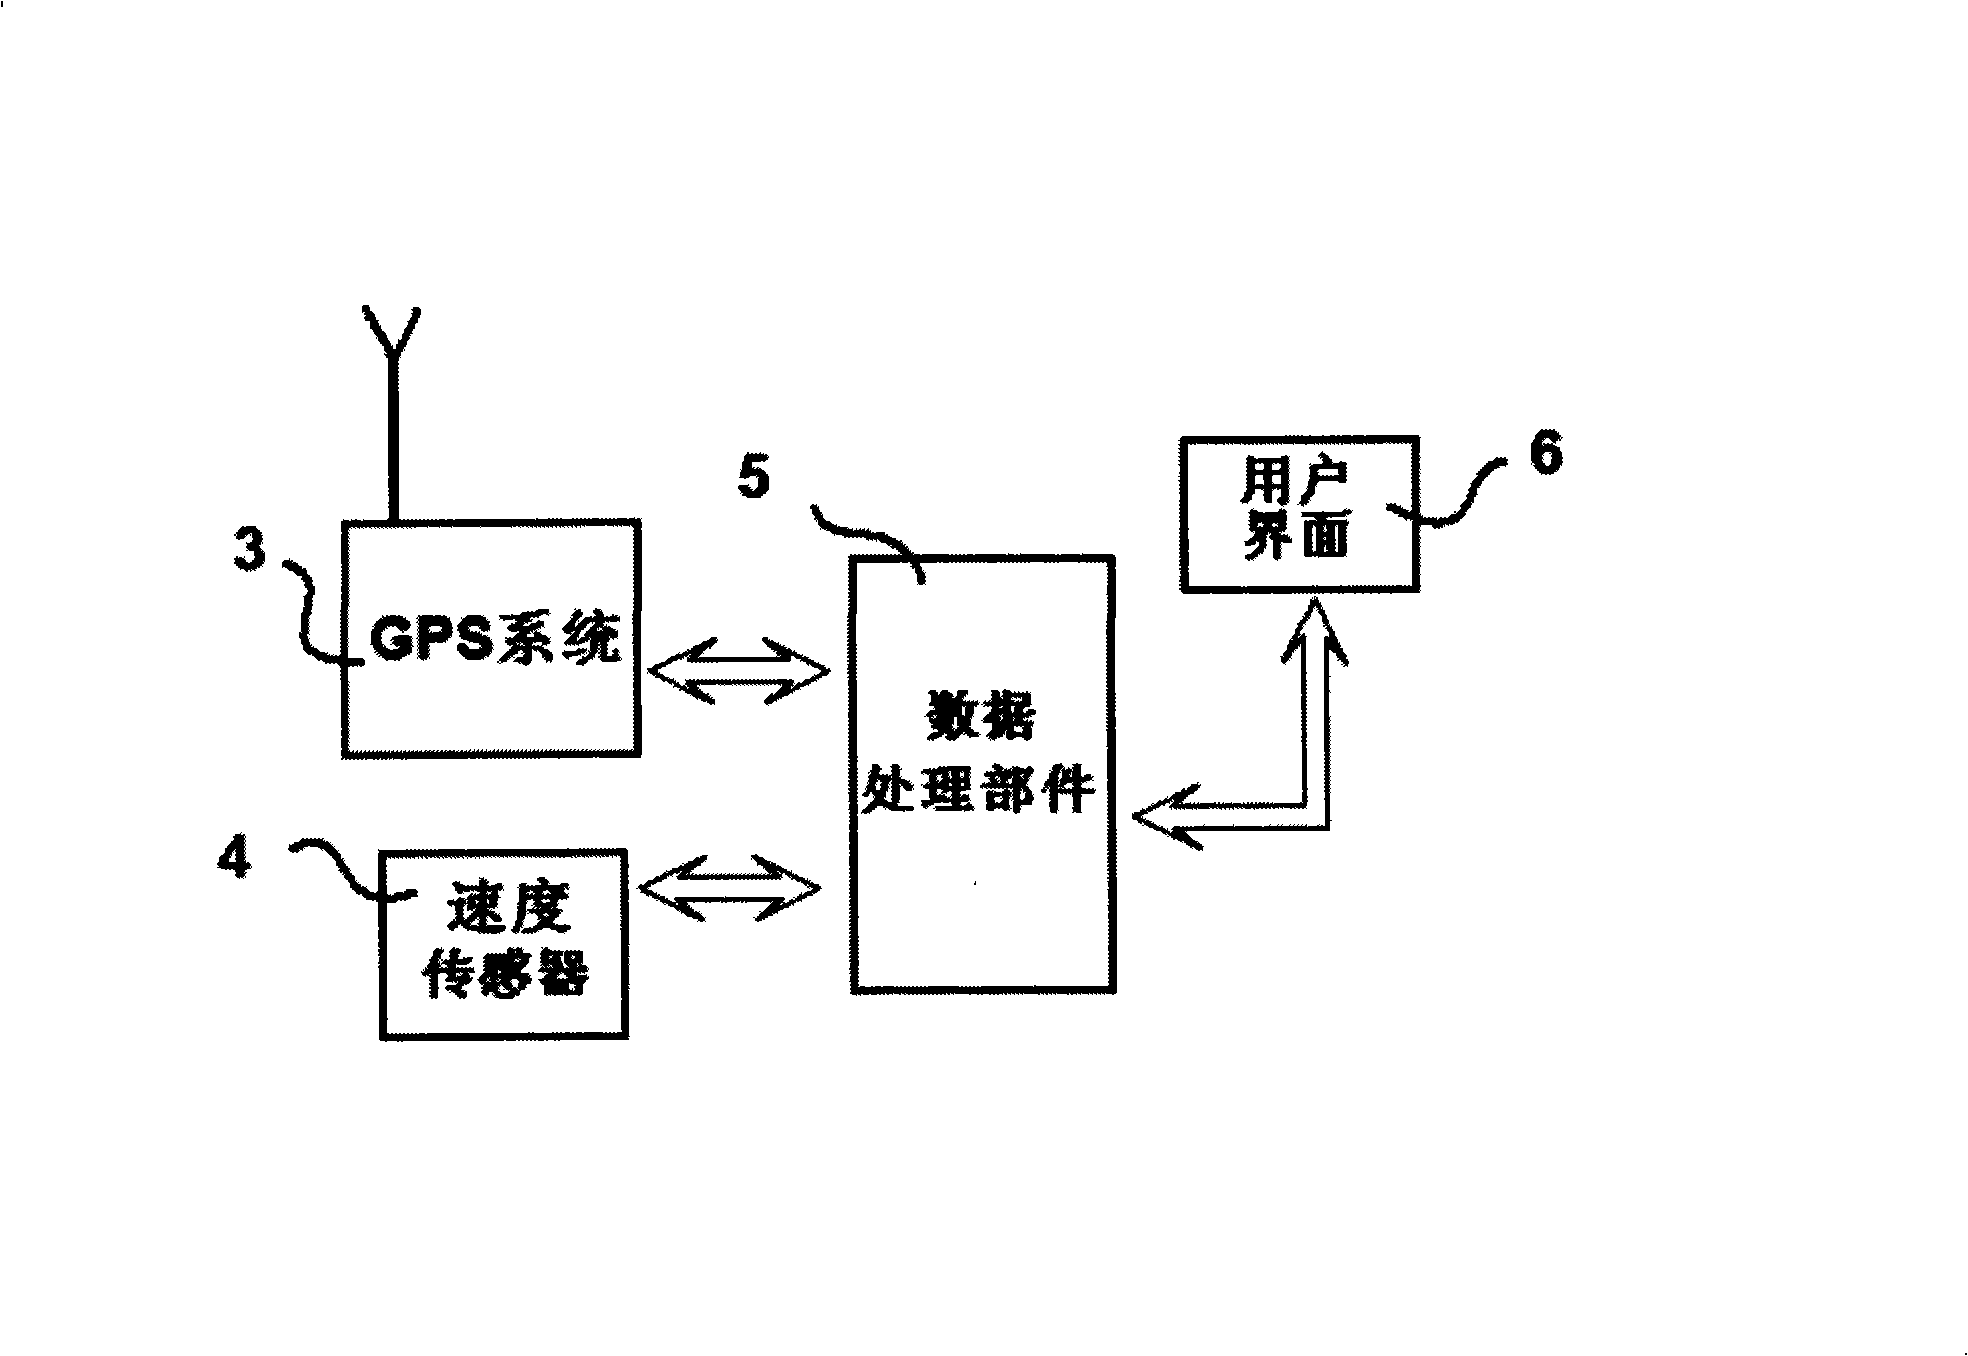 Method and system for compensating inability of positioning, tracking and navigation of GPS system